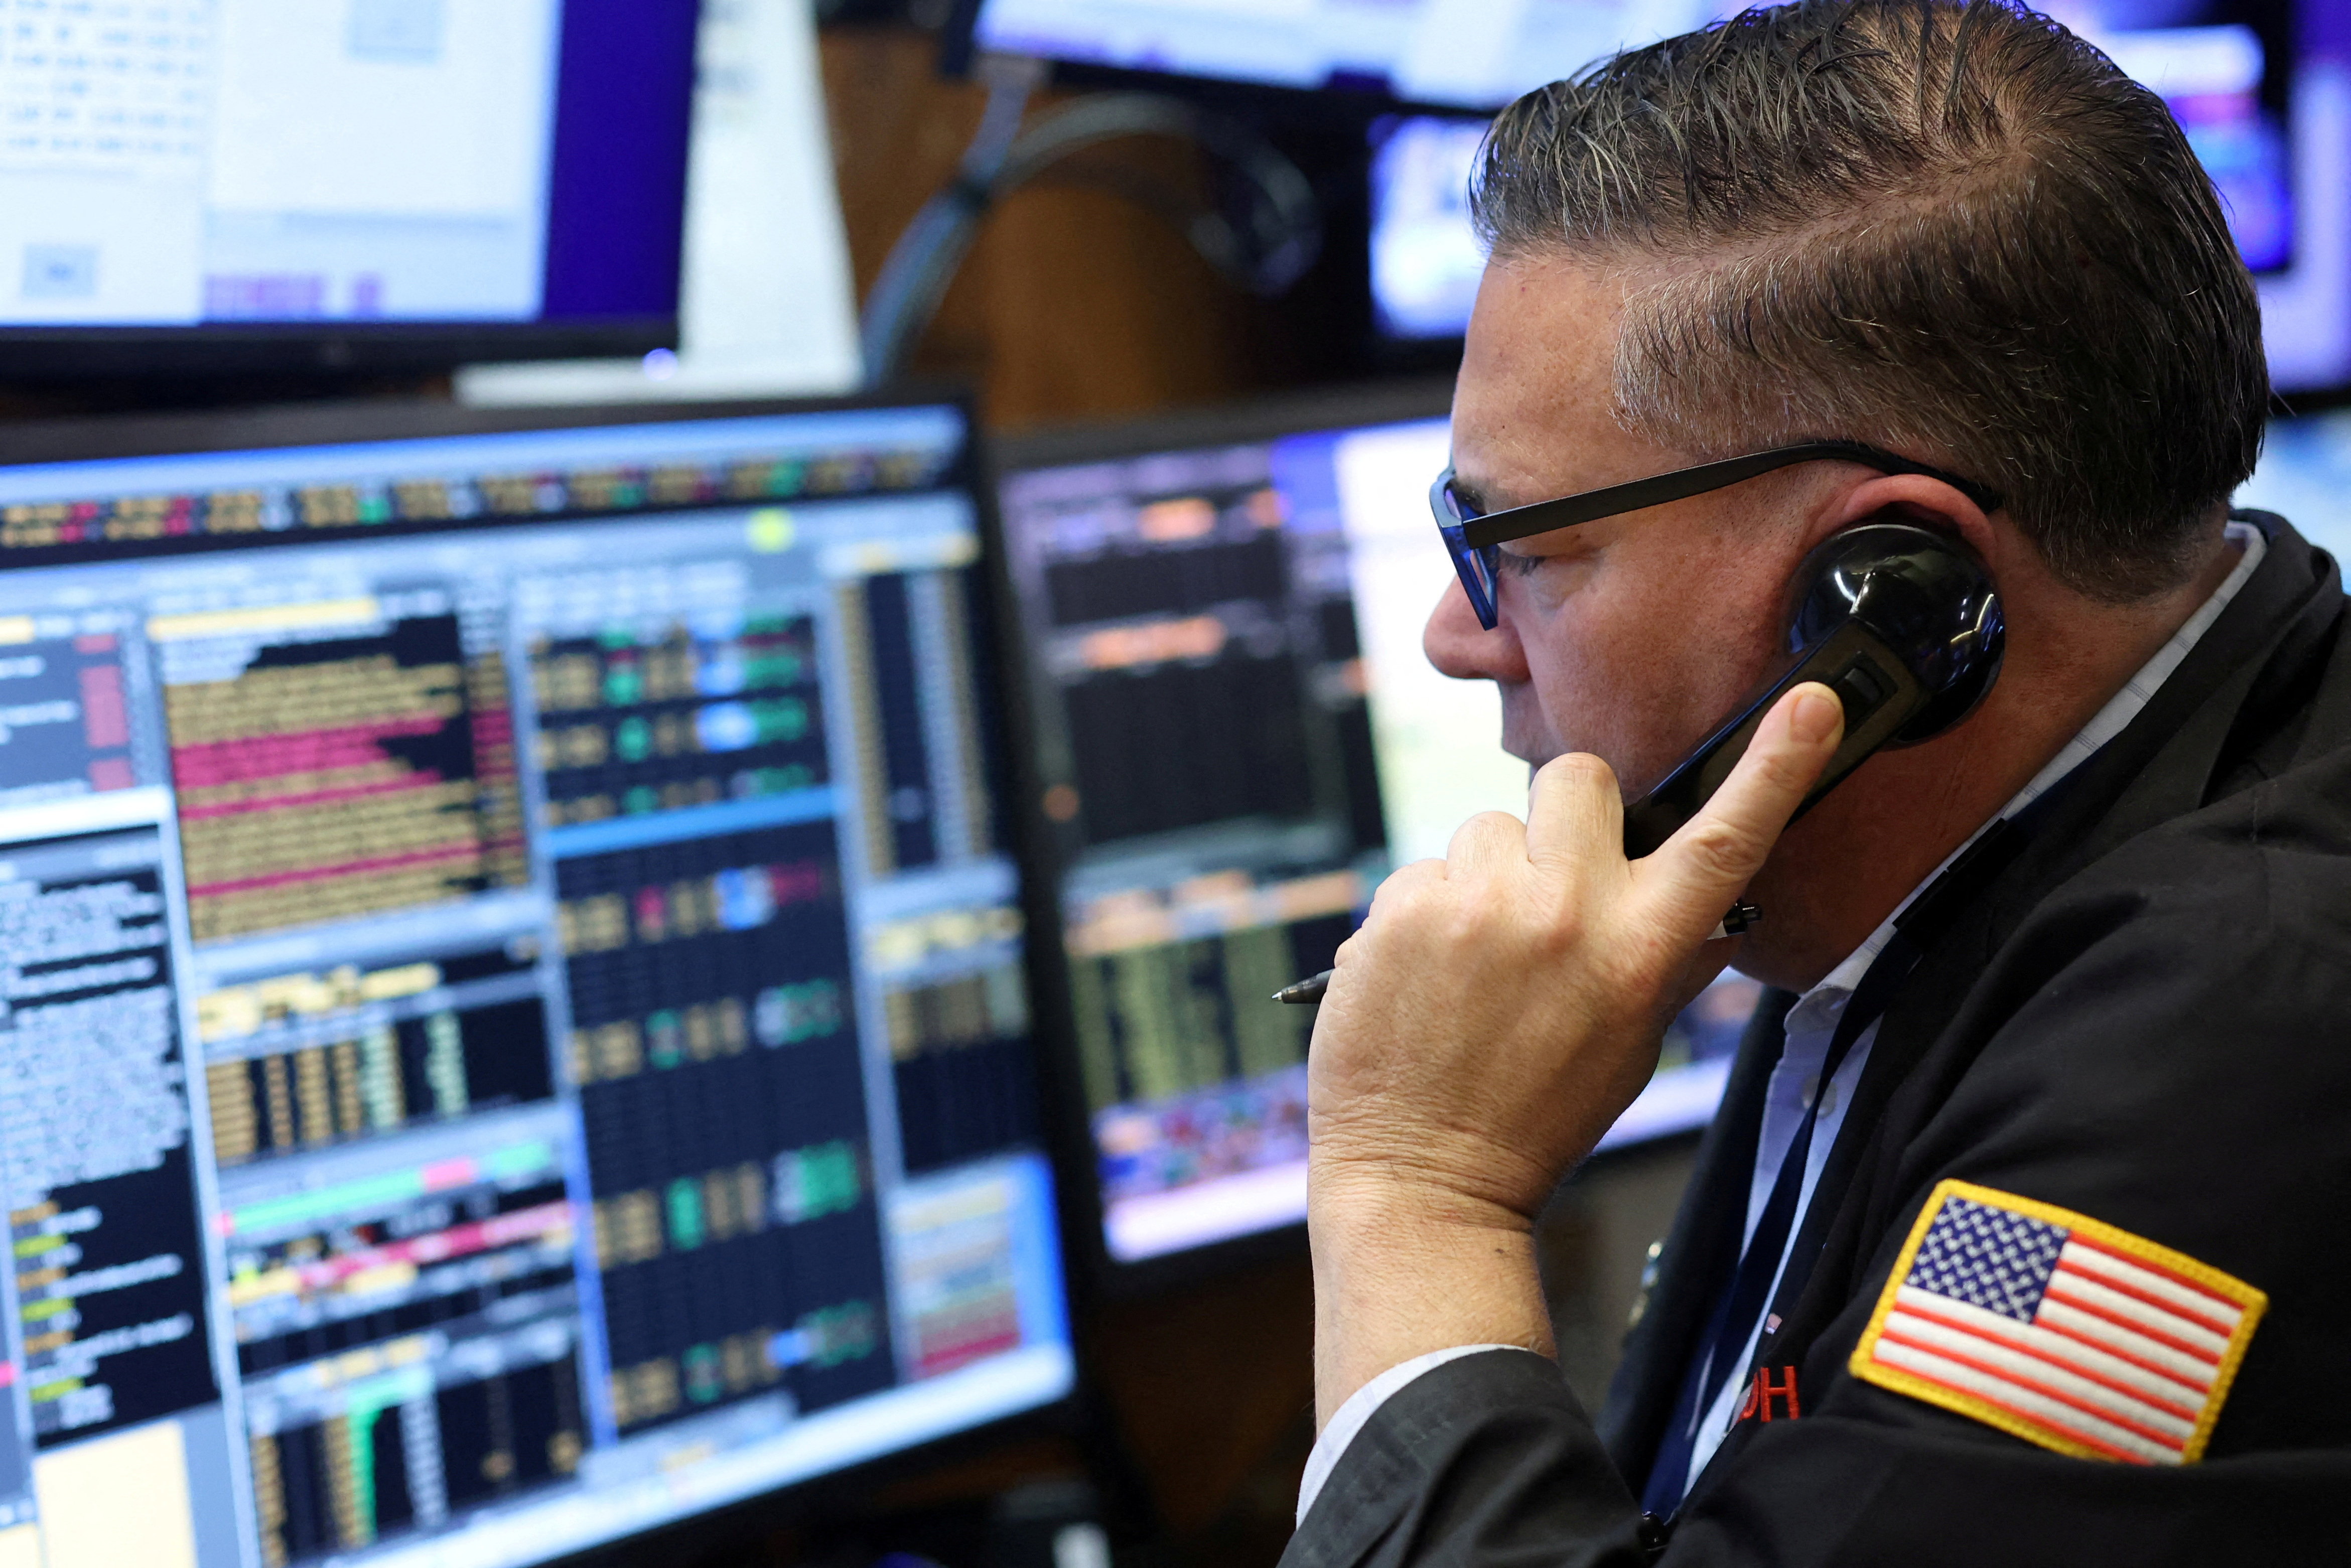 FILE PHOTO: A trader works on the trading floor at the New York Stock Exchange (NYSE) in New York City